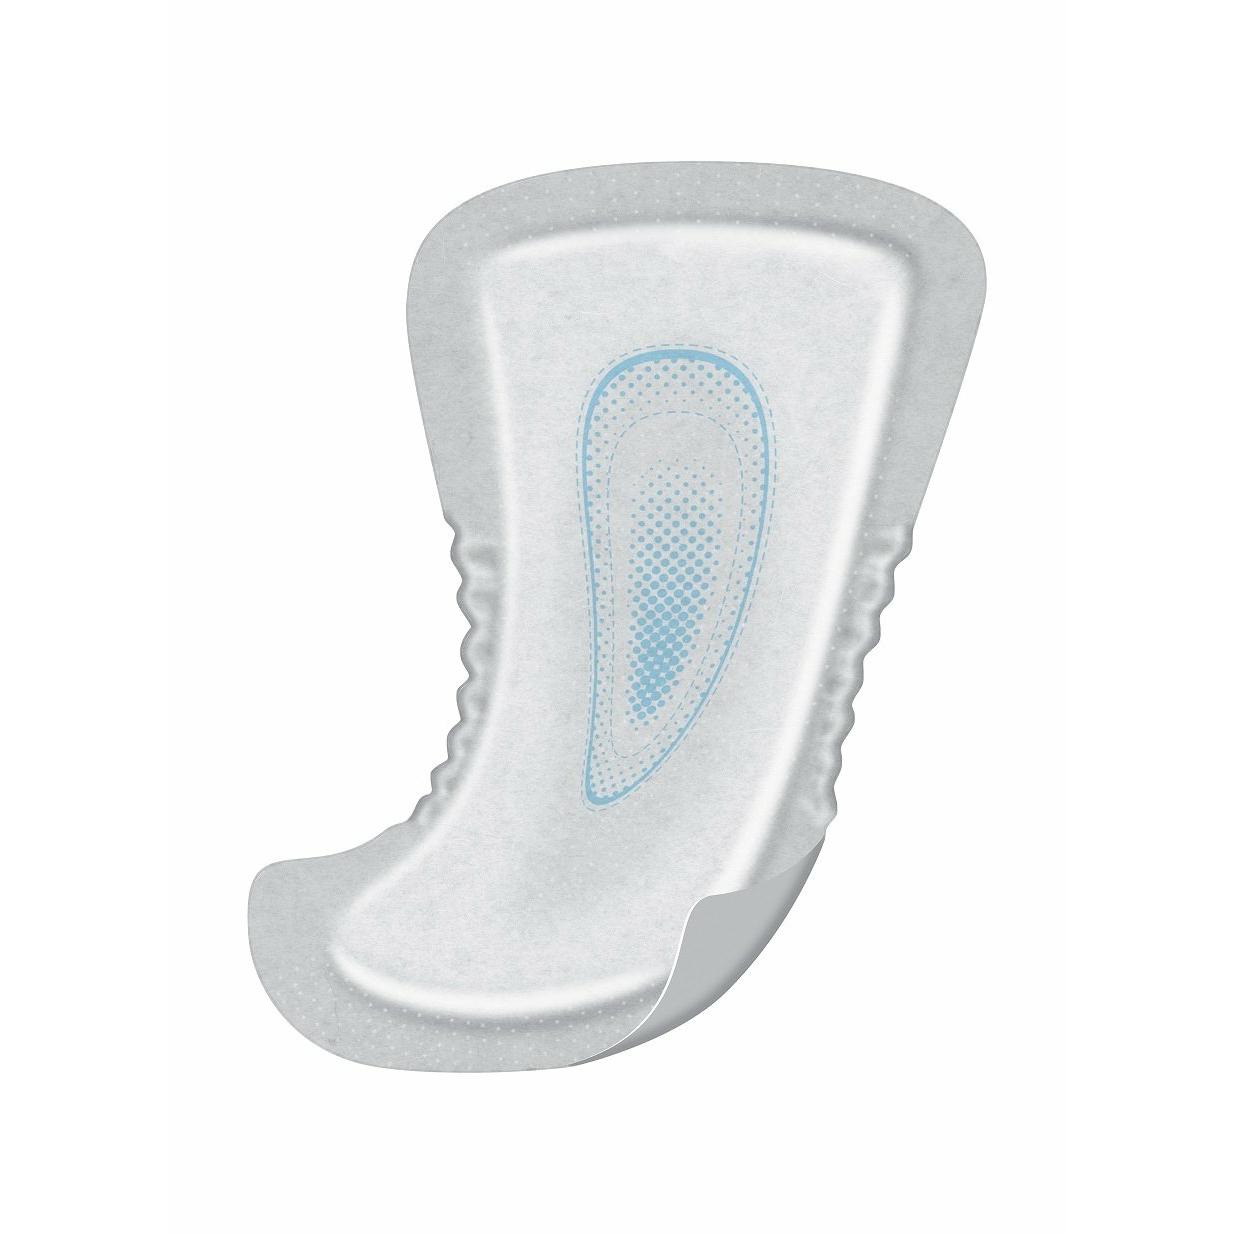 Bladder leak pads for Men  Prevail Male Disposable Underwear Guards for  urinary incontinence –